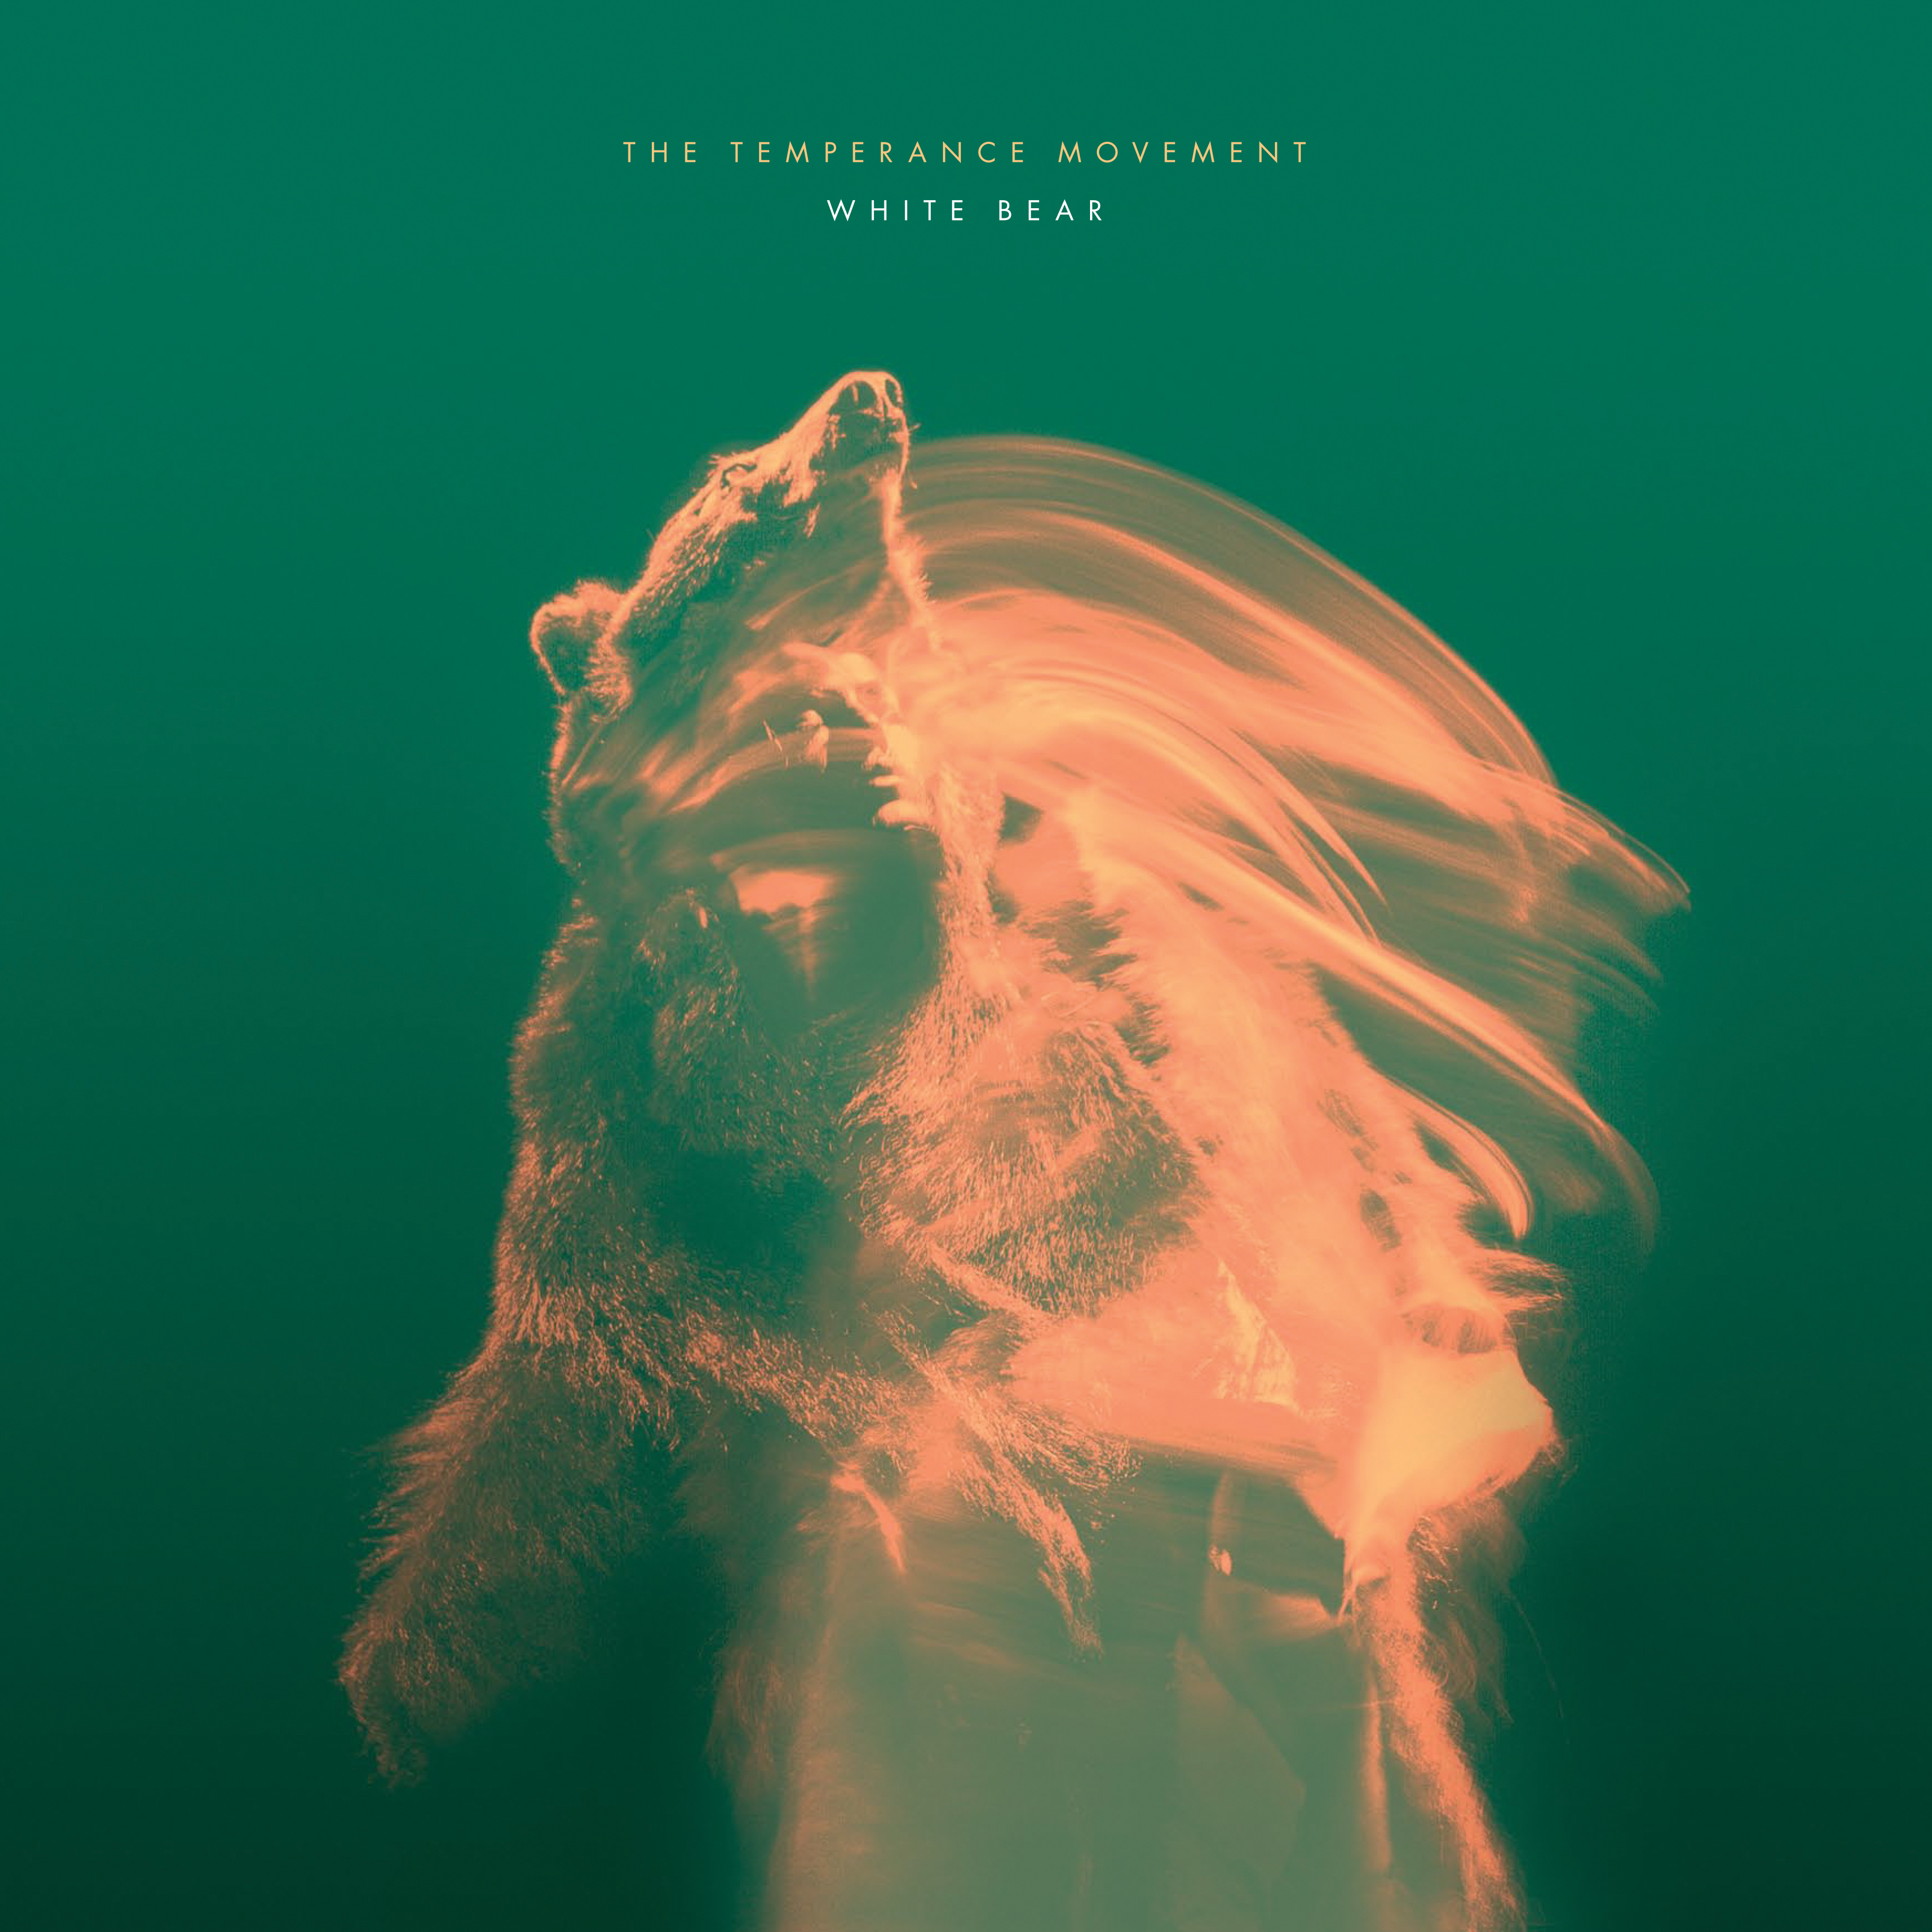 the temperance movement covers rarities